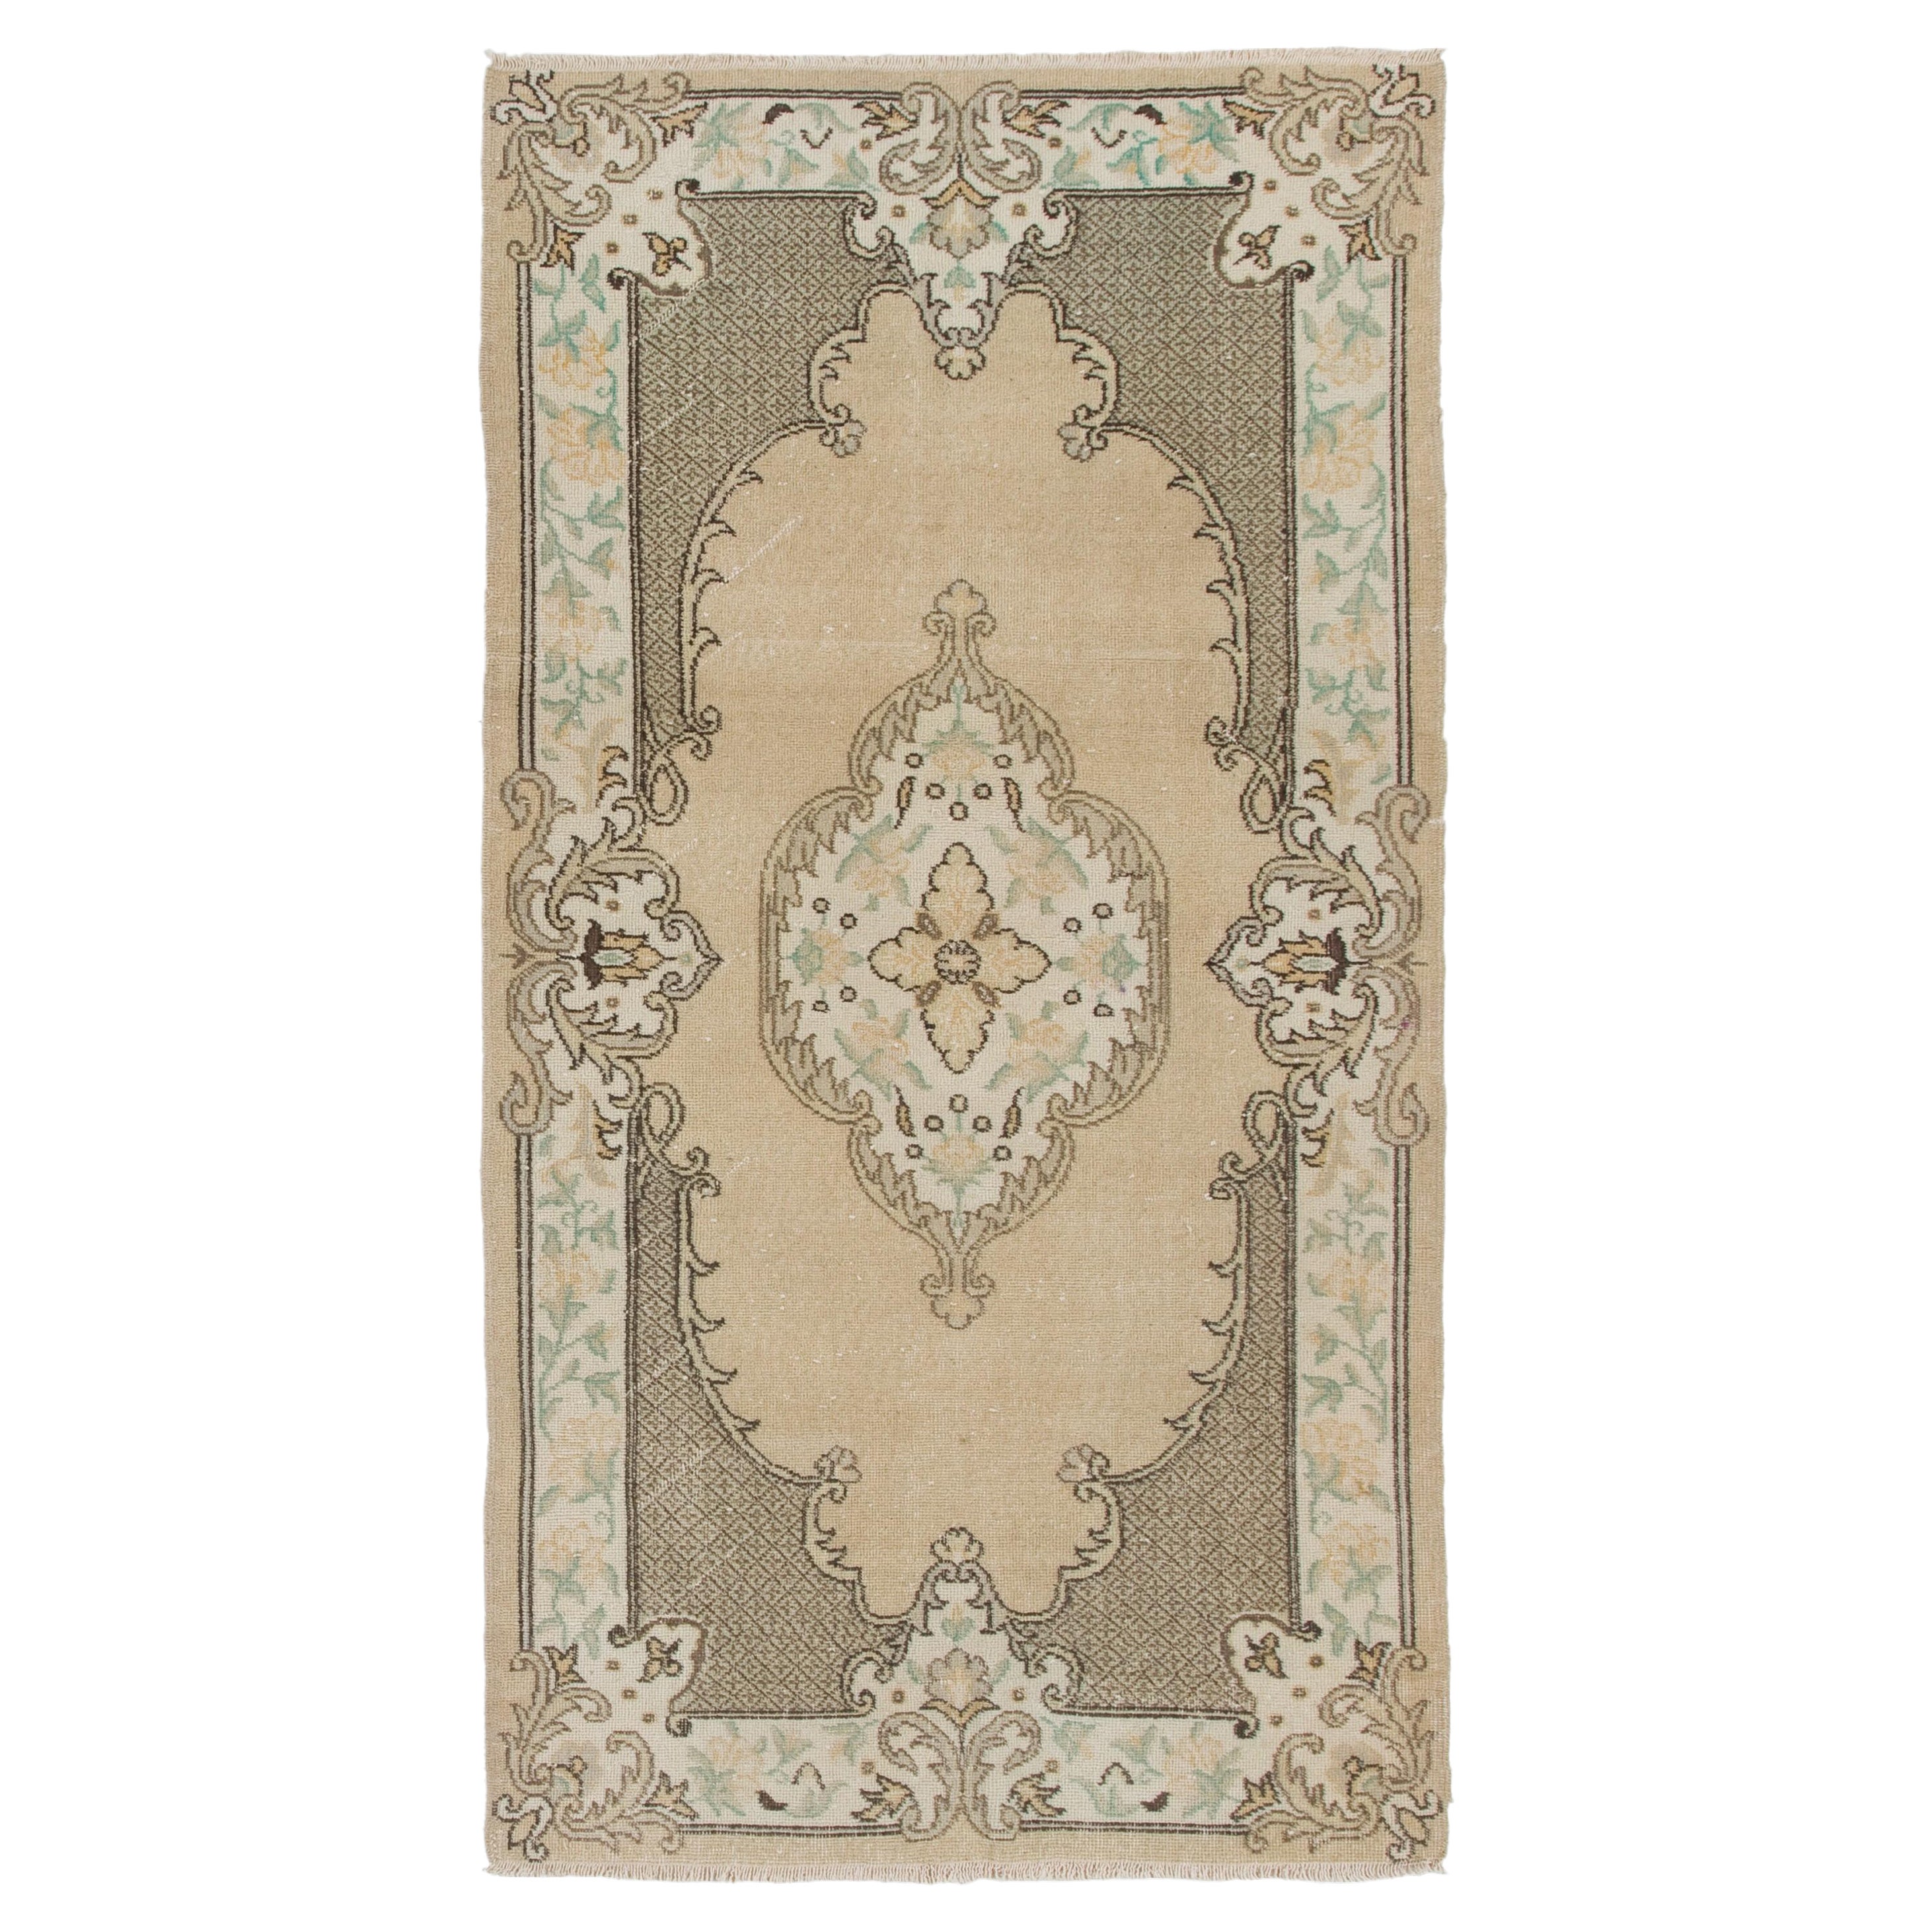 5.5x8.7 Ft French Aubusson Inspired Vintage Hand-Knotted Turkish Wool Accent Rug